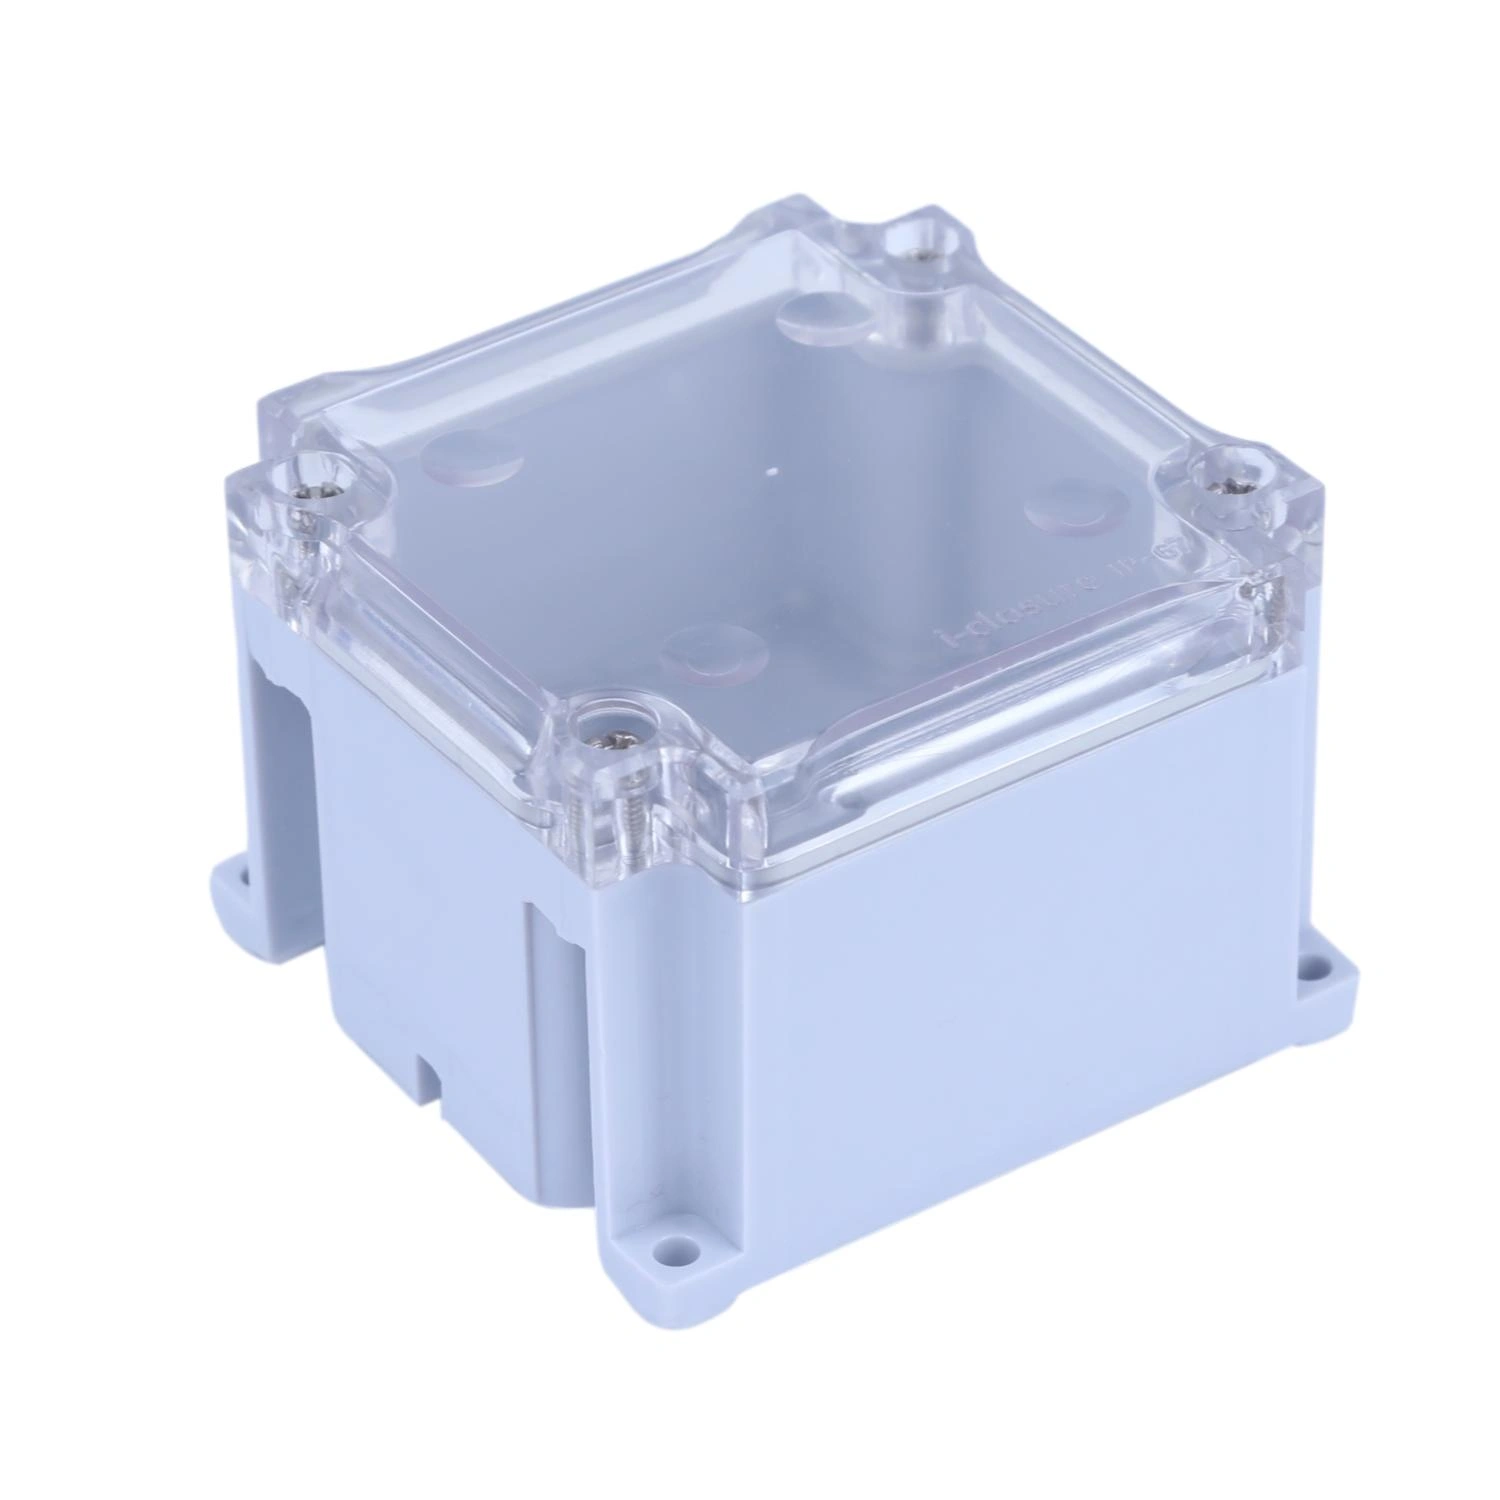 ABS Enclosure 80 x 82 x 55 mm Clear IP67-2